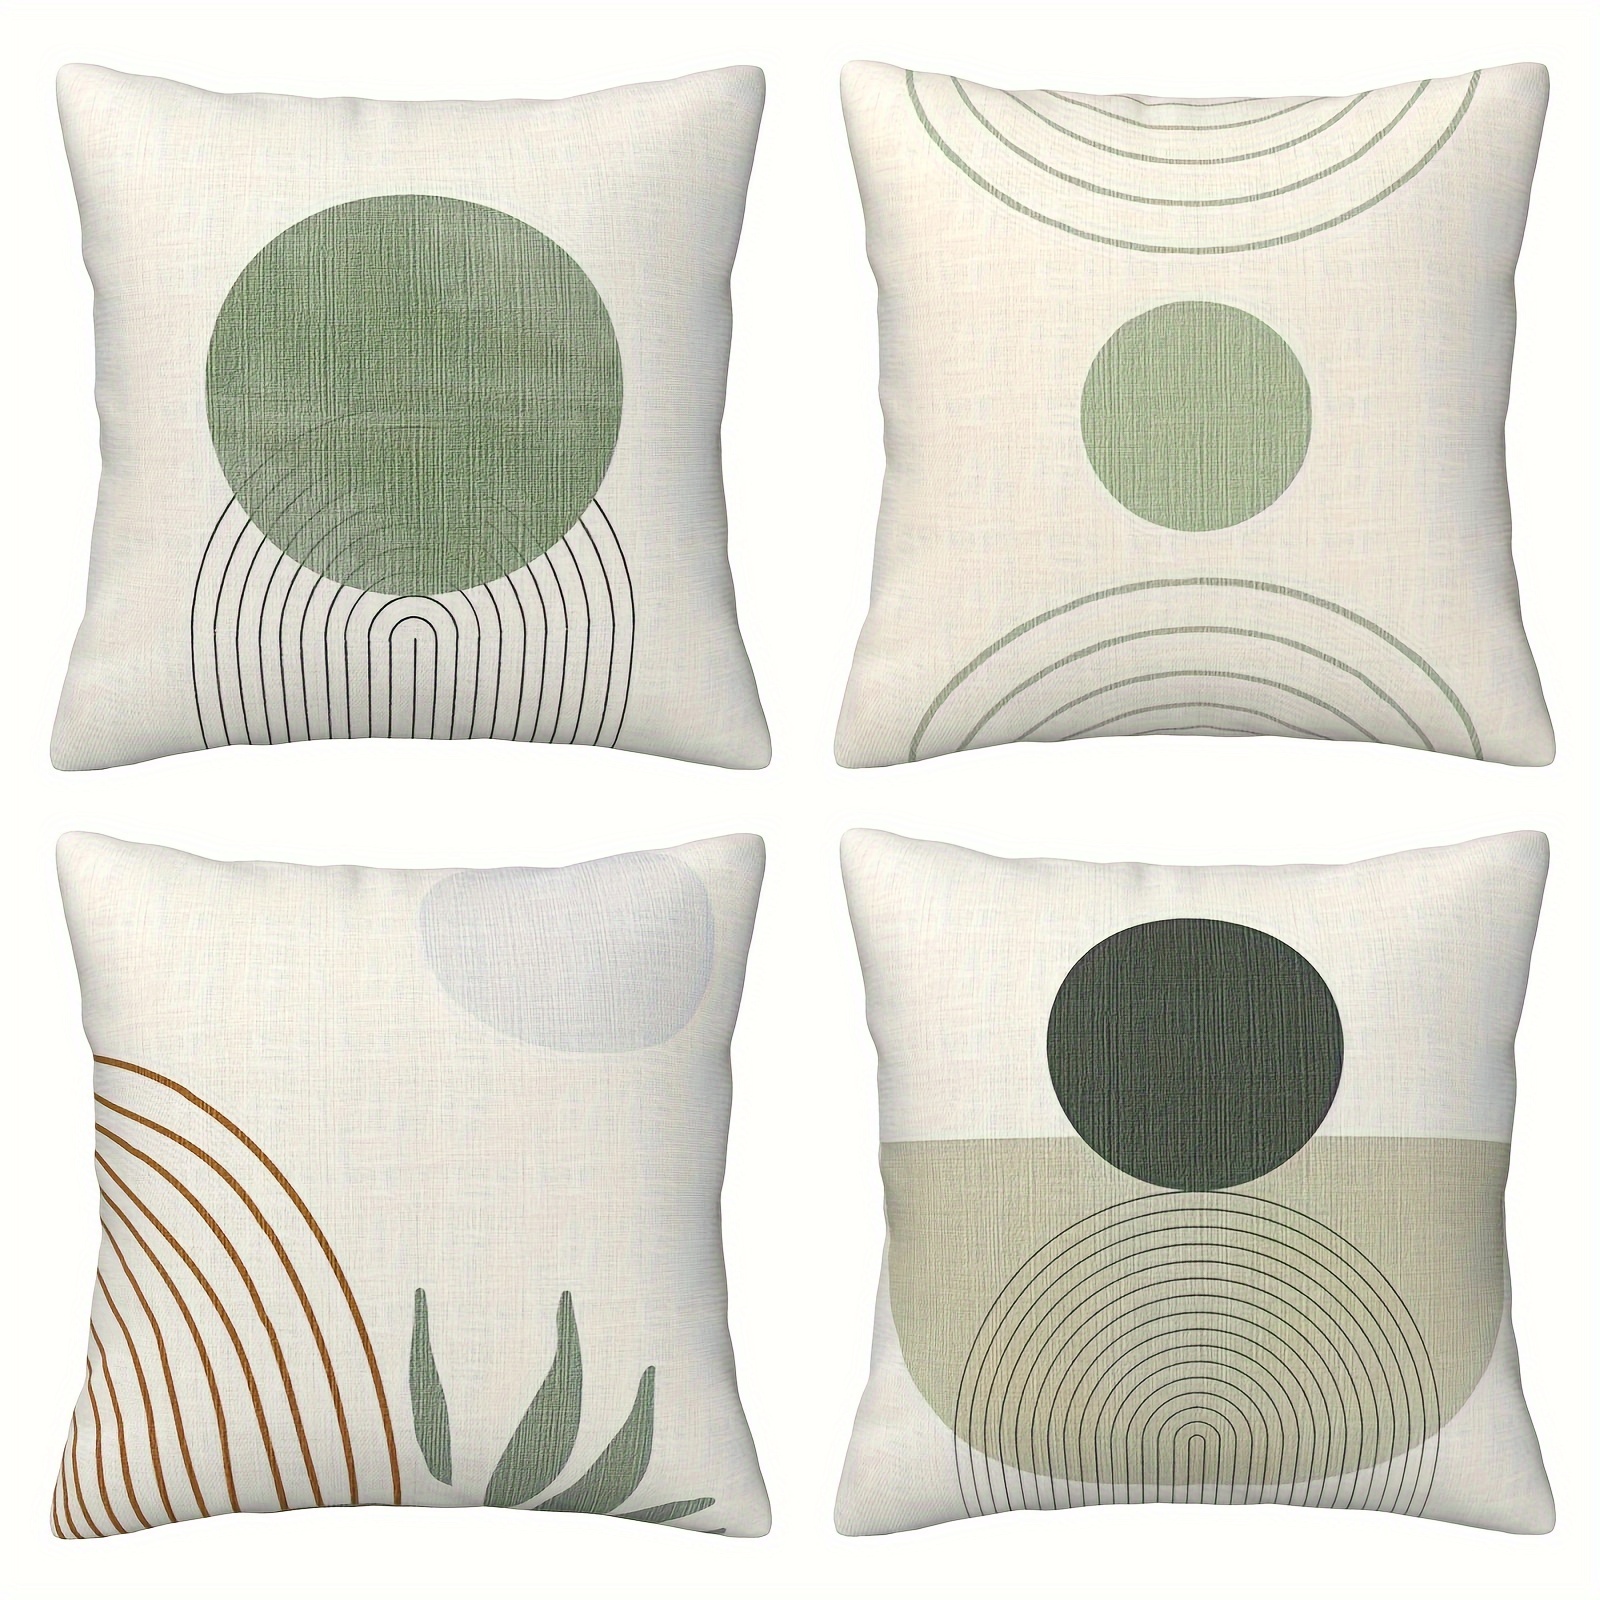 

4pc Beige Green Abstract Boho Line Art Decorative Throw Pillow Covers, Contemporary Linen Blend Cushion Cases, Easy Care Zippered Pillowcases For Home & Farmhouse, Modern Woven Design - No Filling